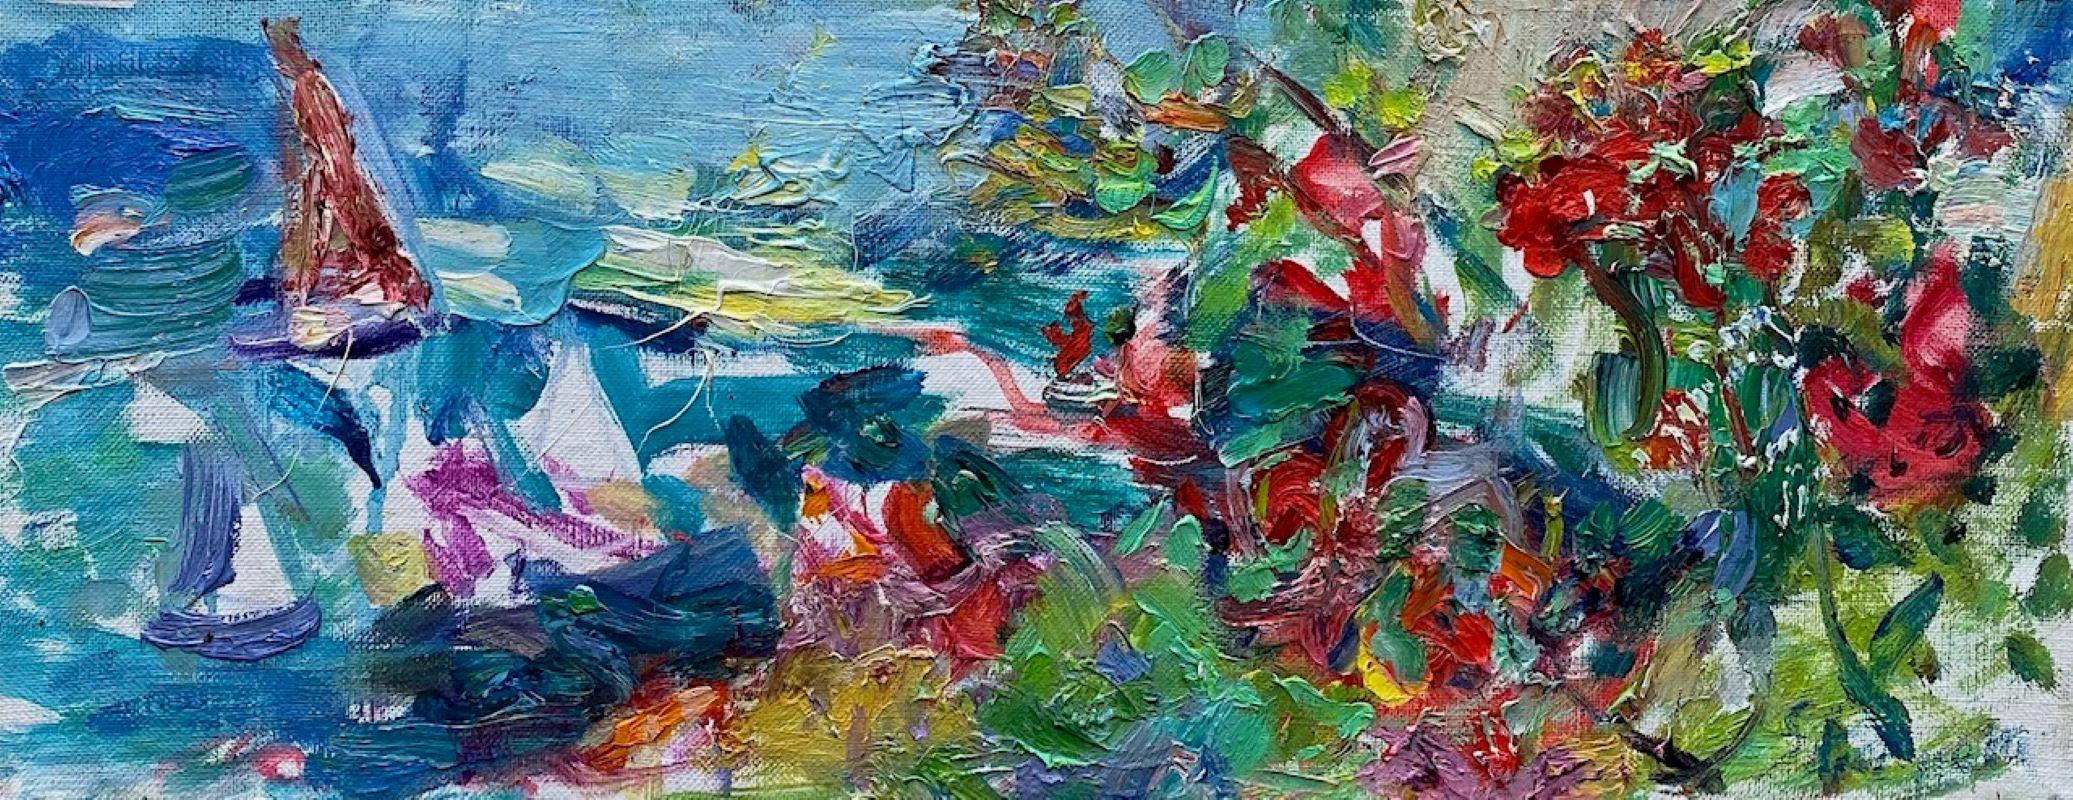 Summertime, original abstract marine landscape  - Painting by Sonia Grineva